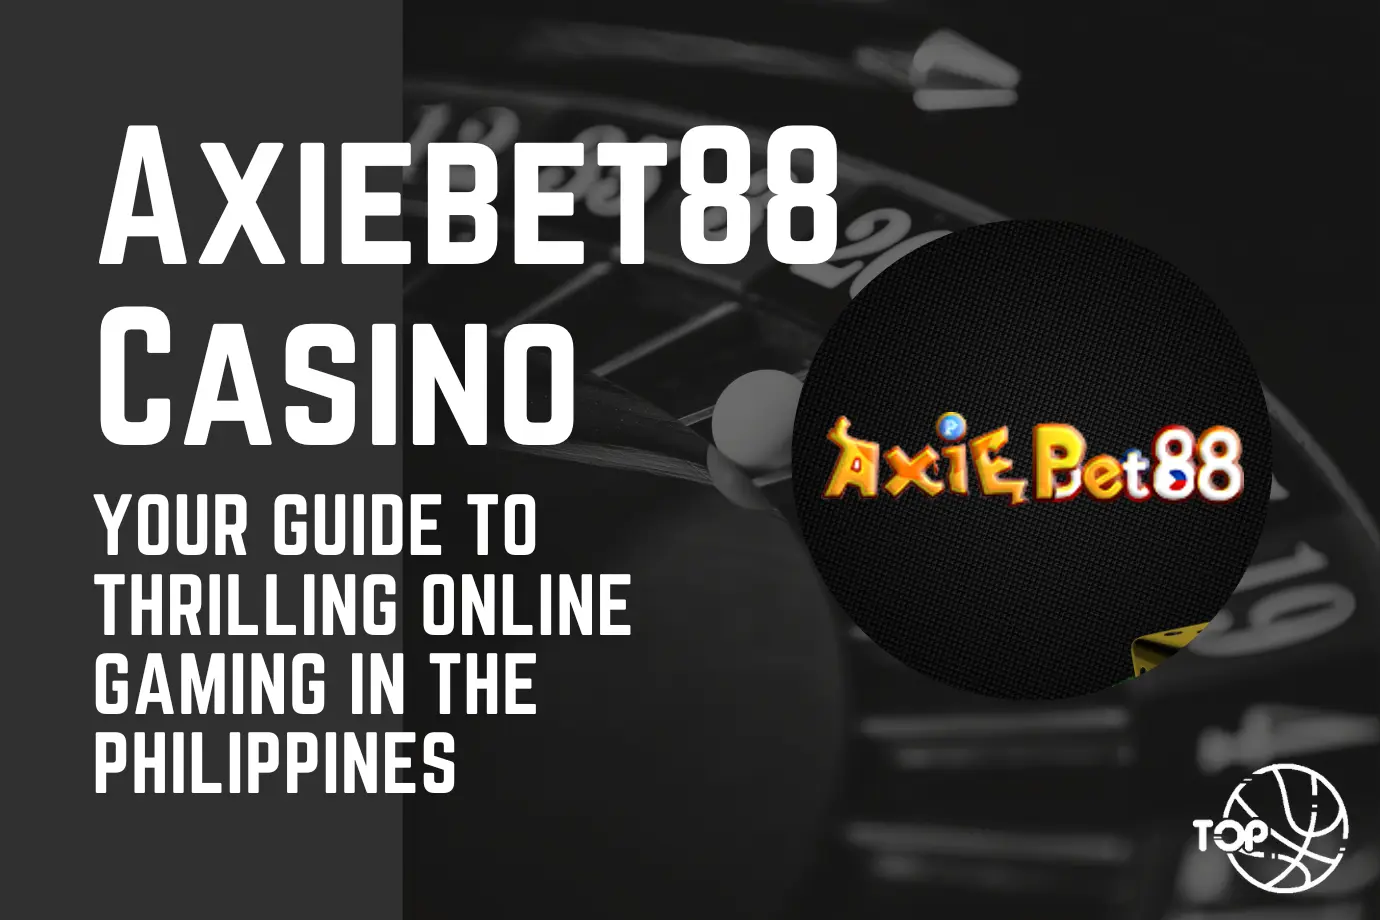 Axiebet88 Casino: Your Guide to Thrilling Online Gaming in the Philippines